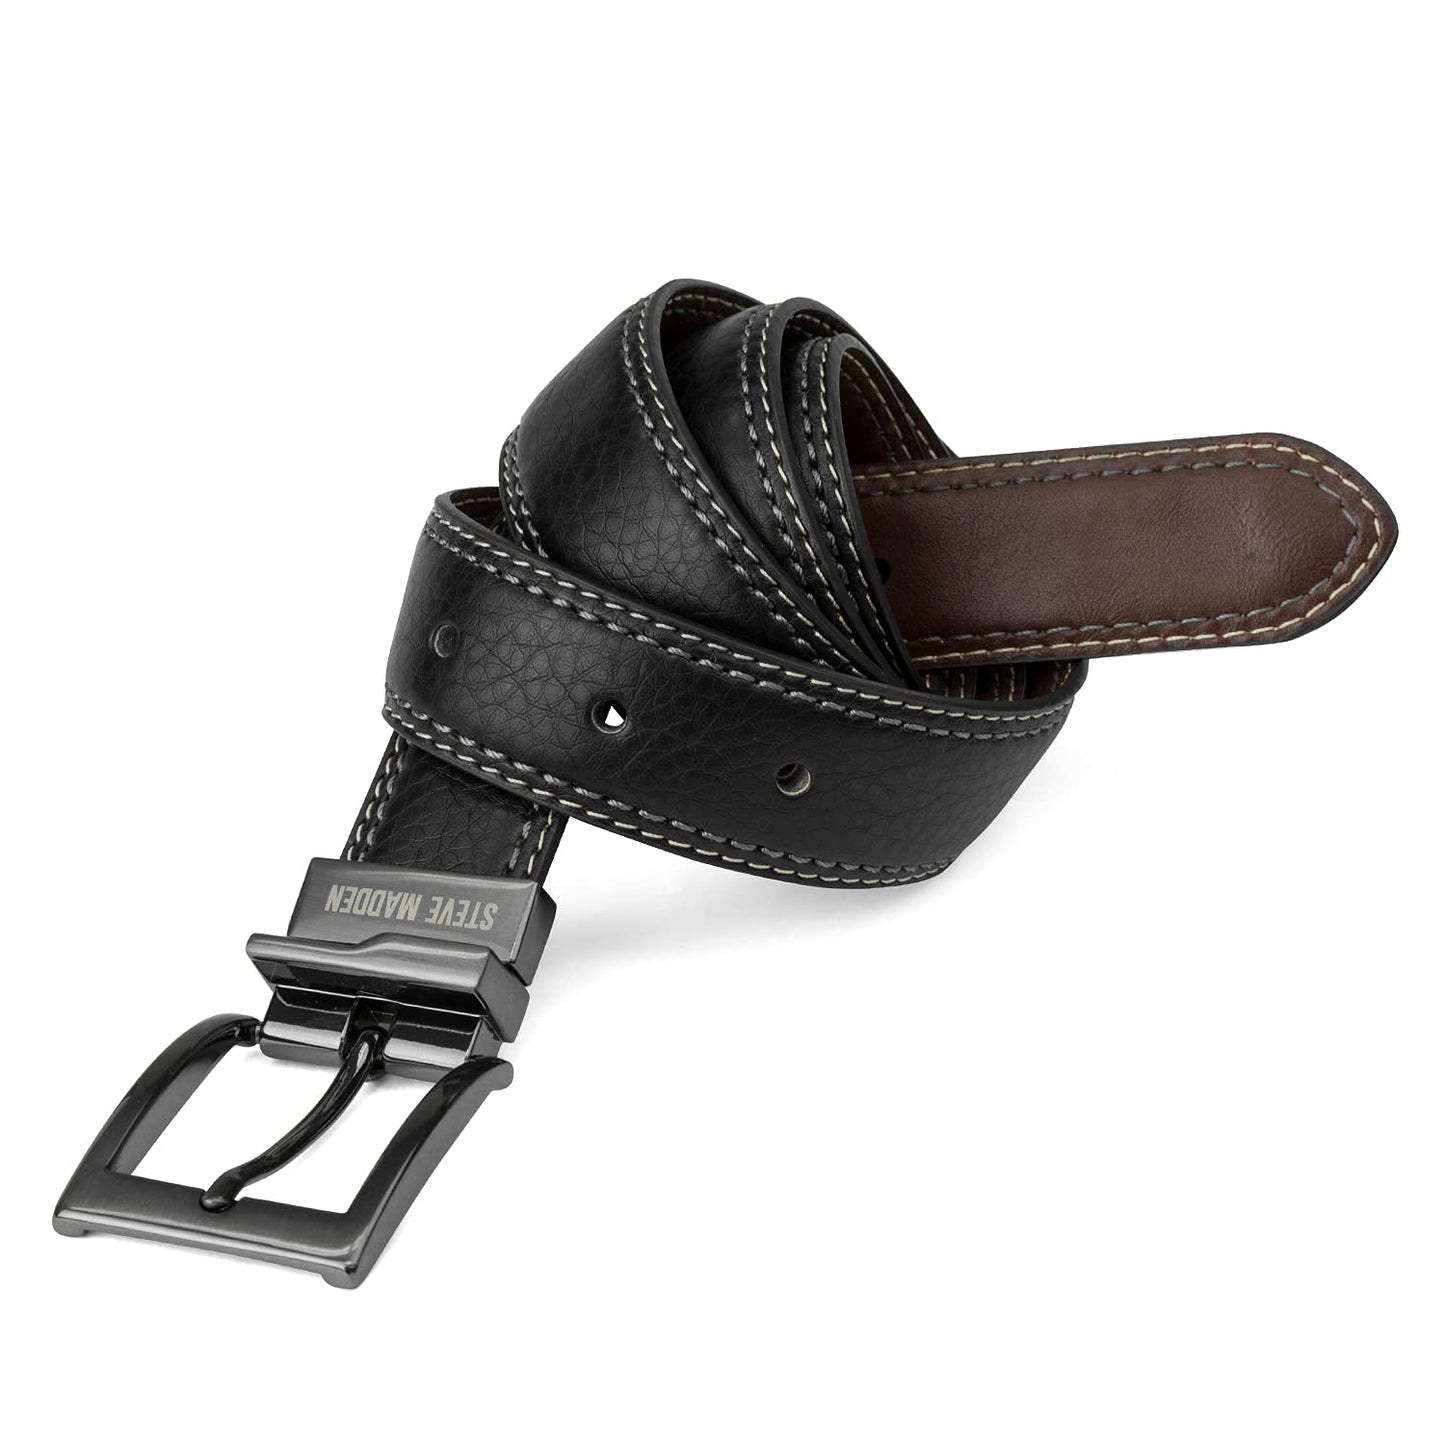 Steve Madden Men's Dress Casual Every Day Leather Belt